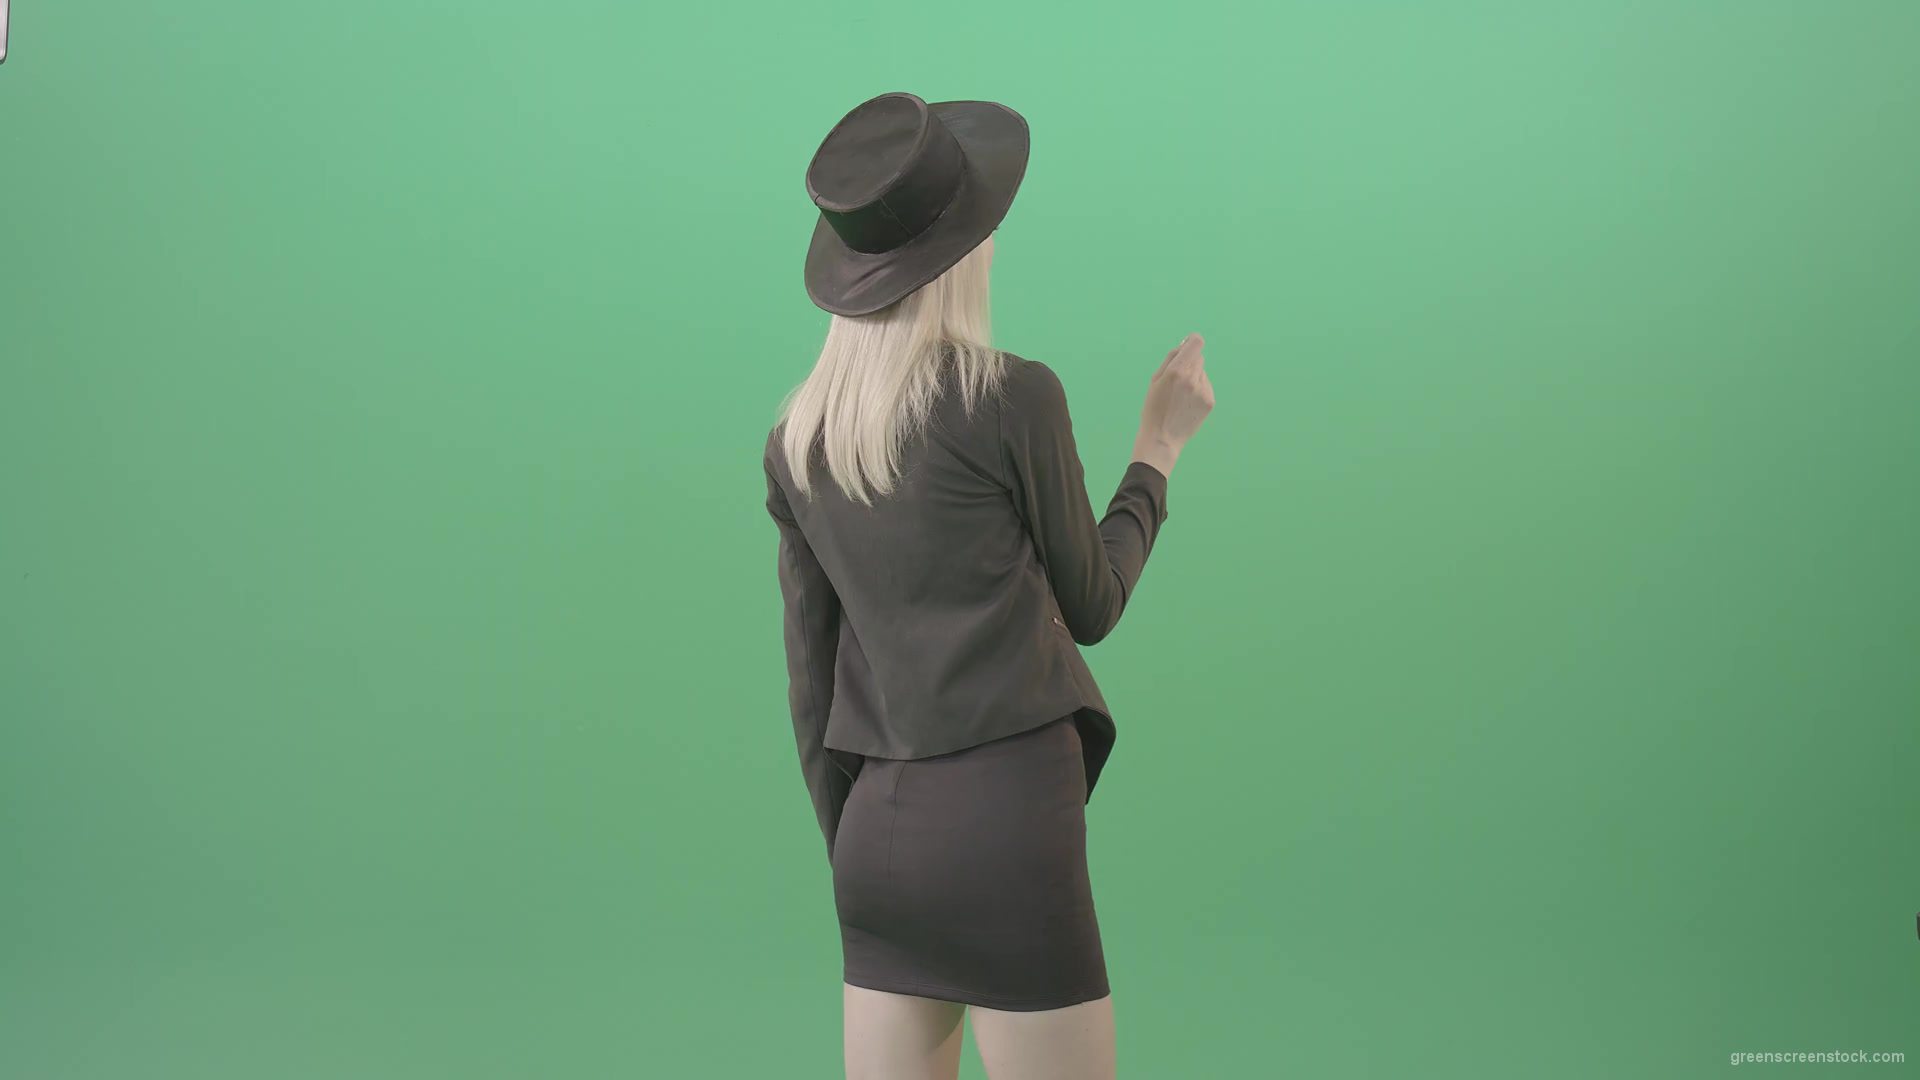 Blonde-Girl-looking-digital-virtual-products-on-touch-screen-from-back-side-4K-Green-Screen-Video-Footage-1920_008 Green Screen Stock